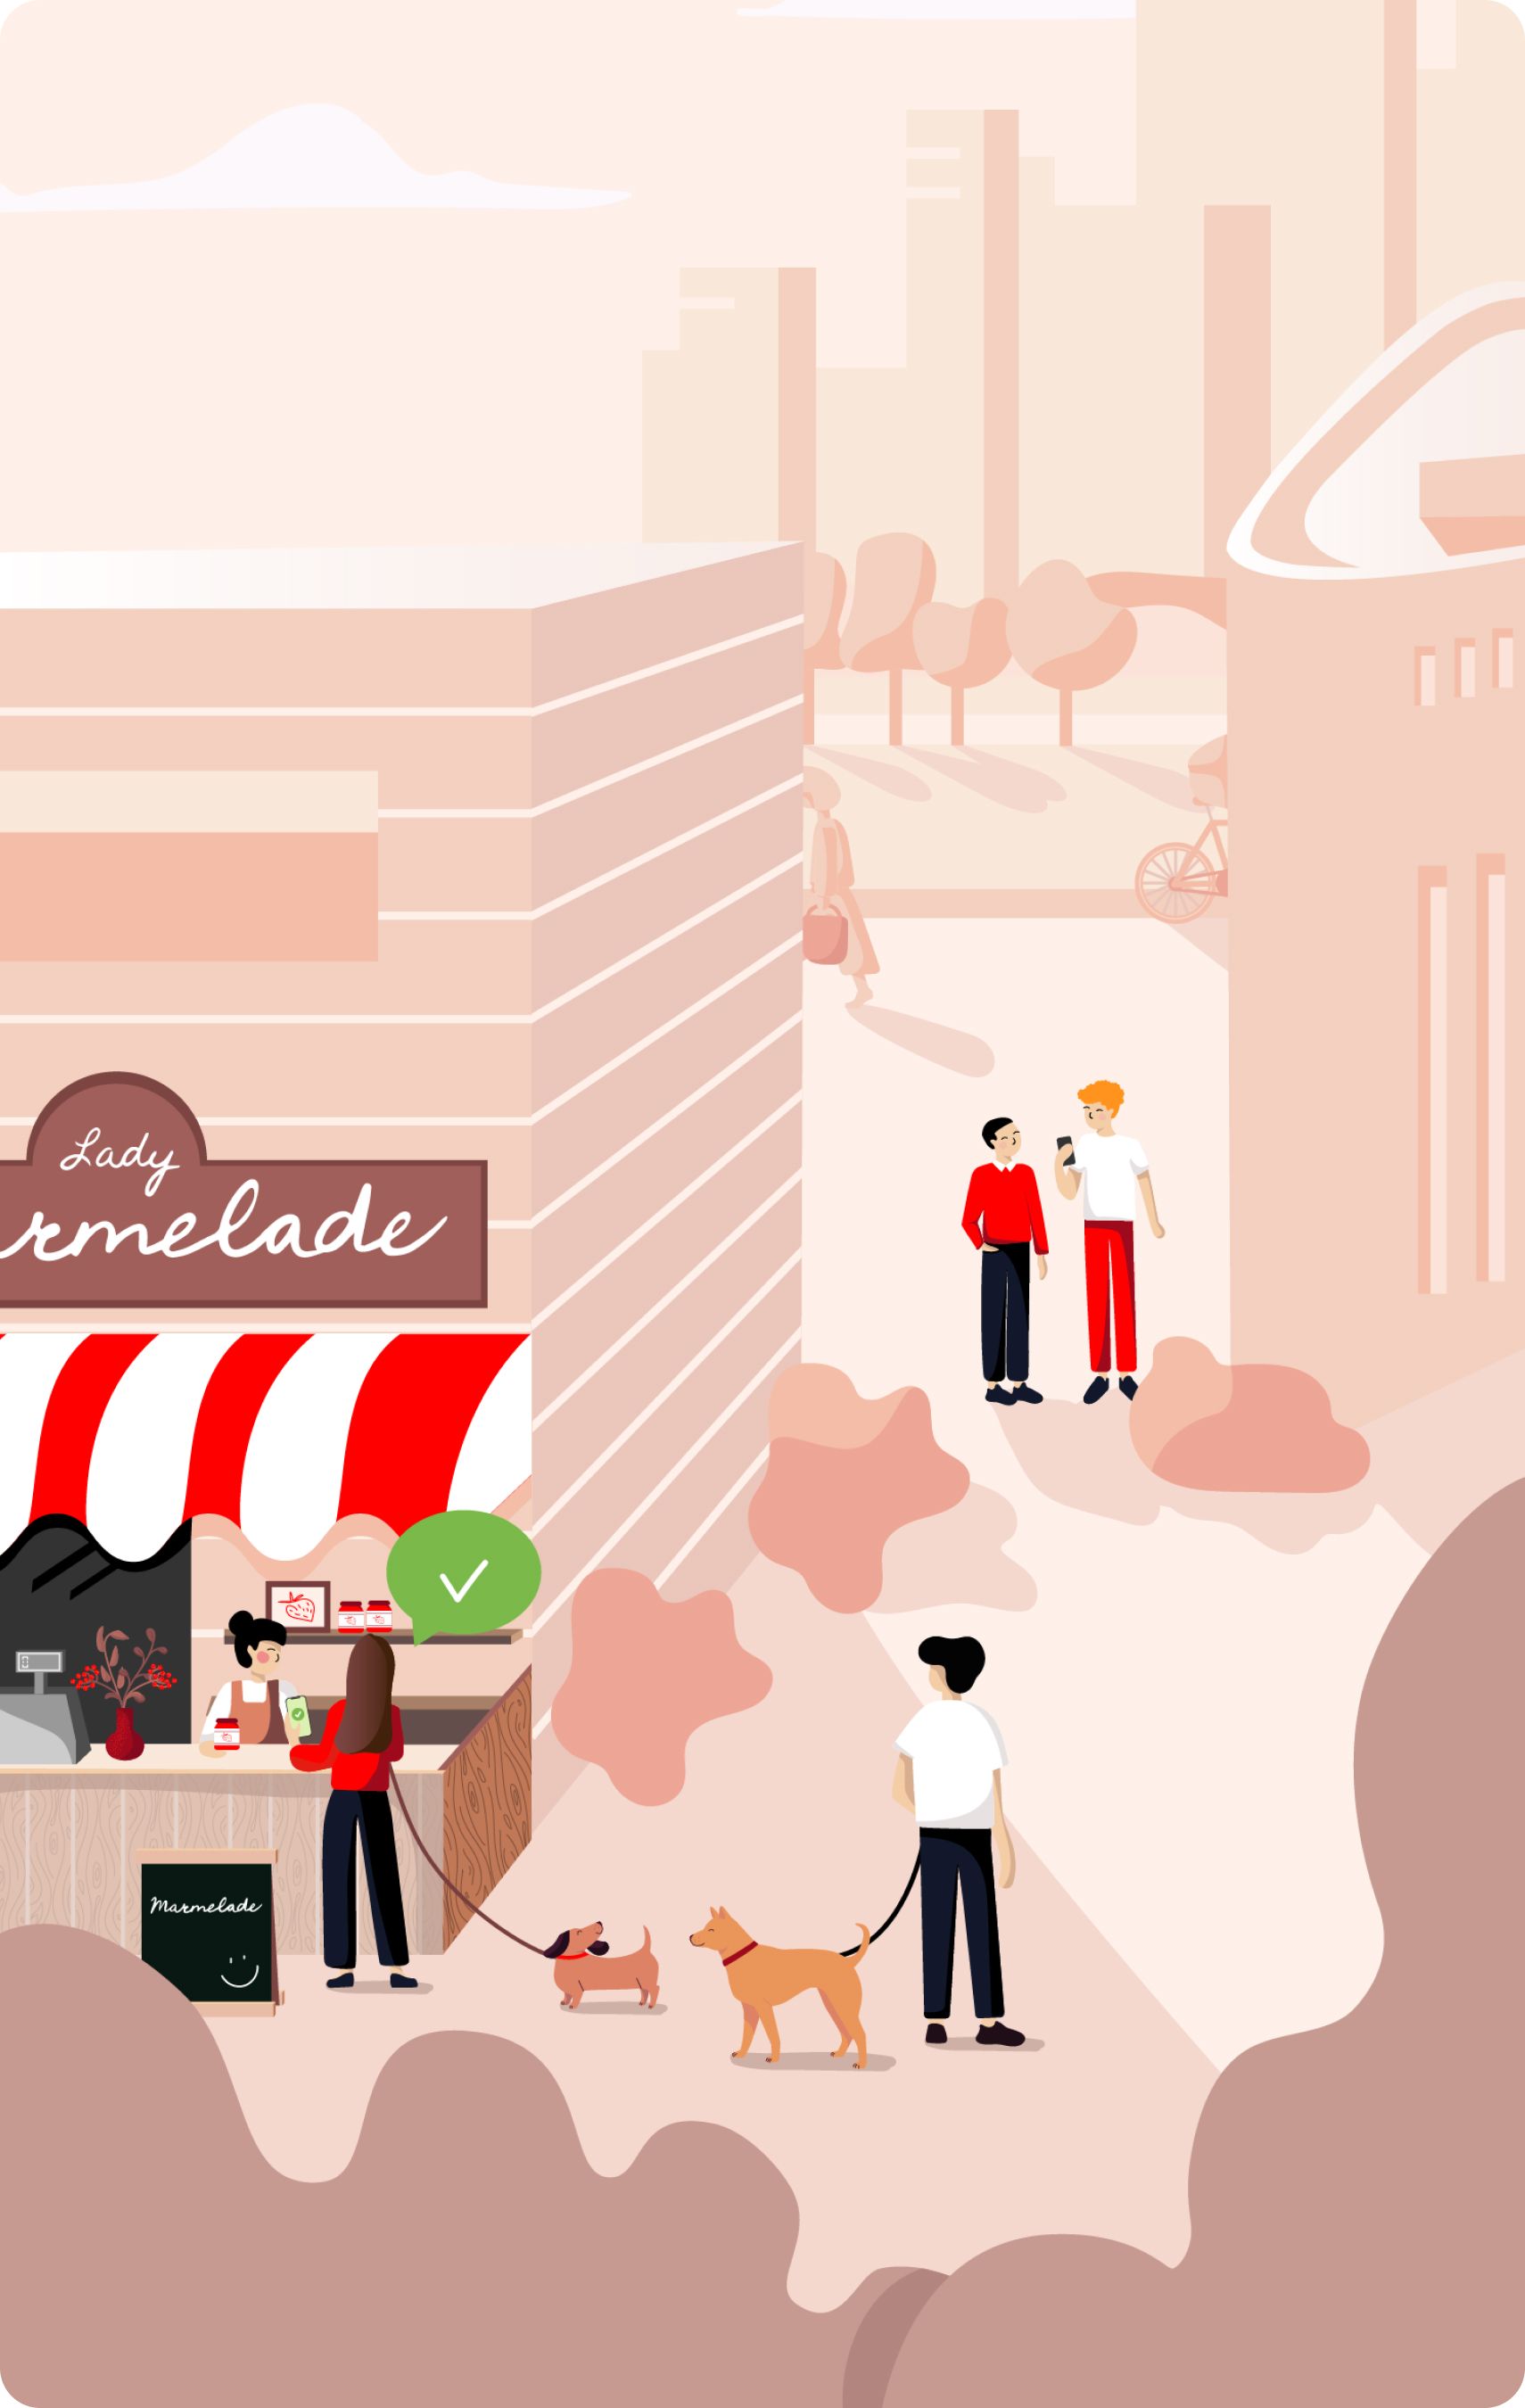 Illustration of a small store surrounded by a park and buildings. There are people and dogs.